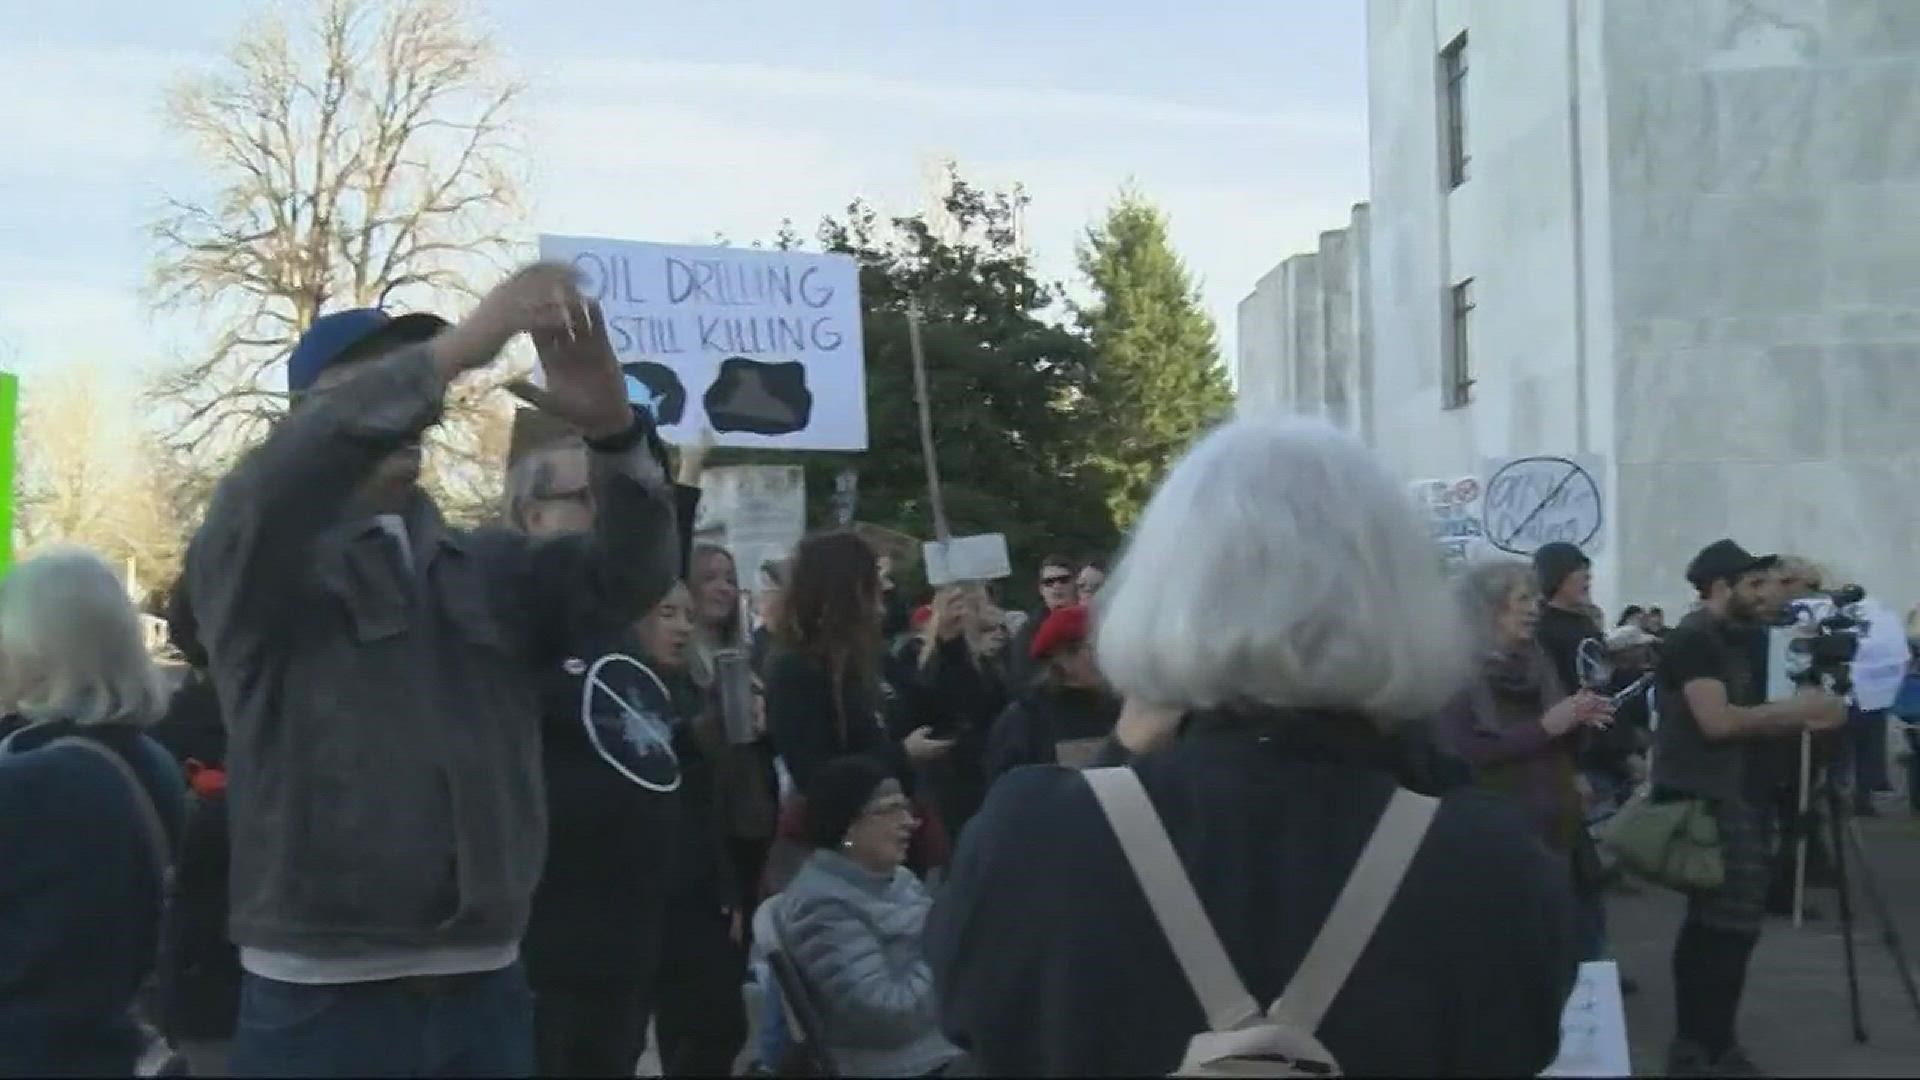 Protesters gathered in Salem against the oil drill plan